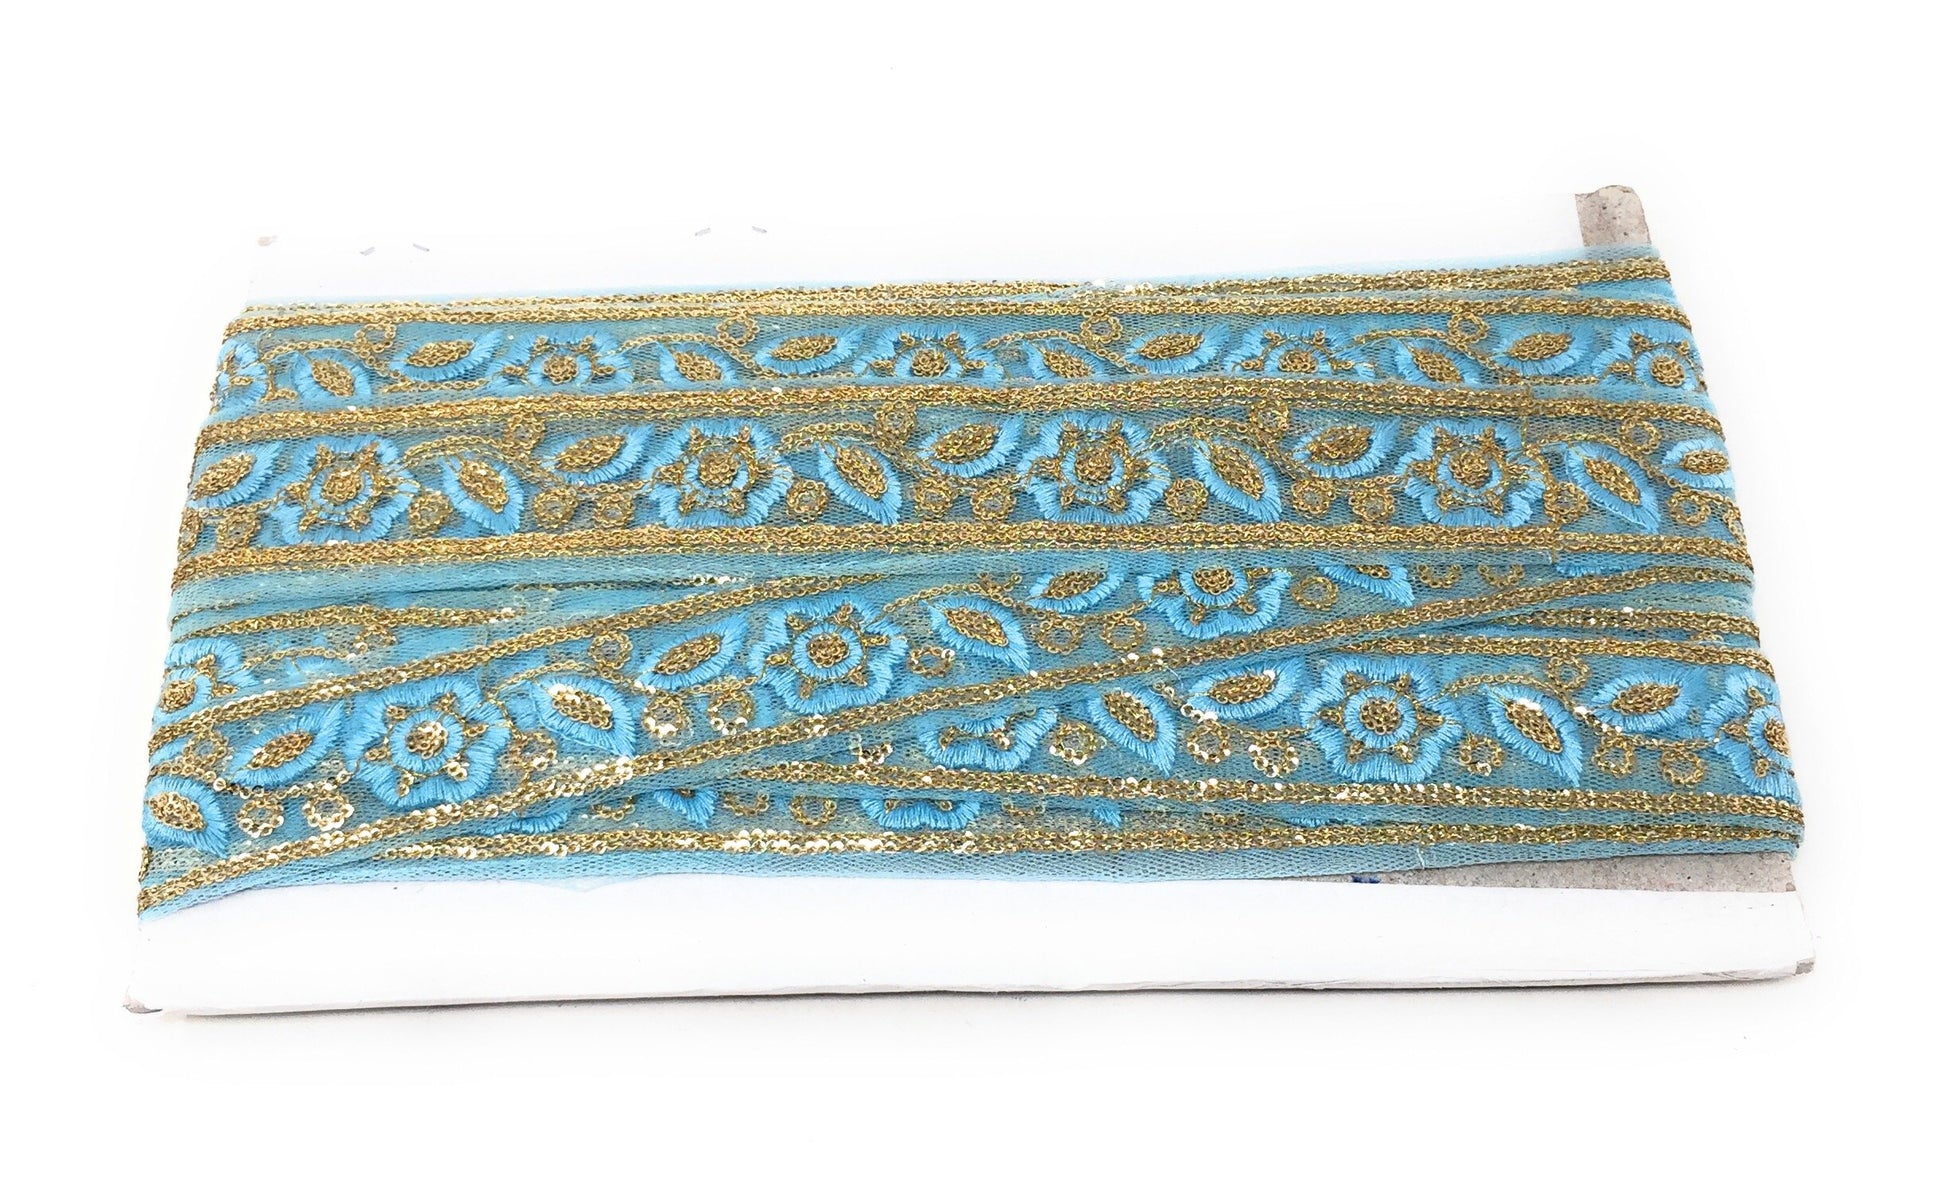 Pastel Blue Sequins Embroidery Saree Border Trim - 9 Meter Roll